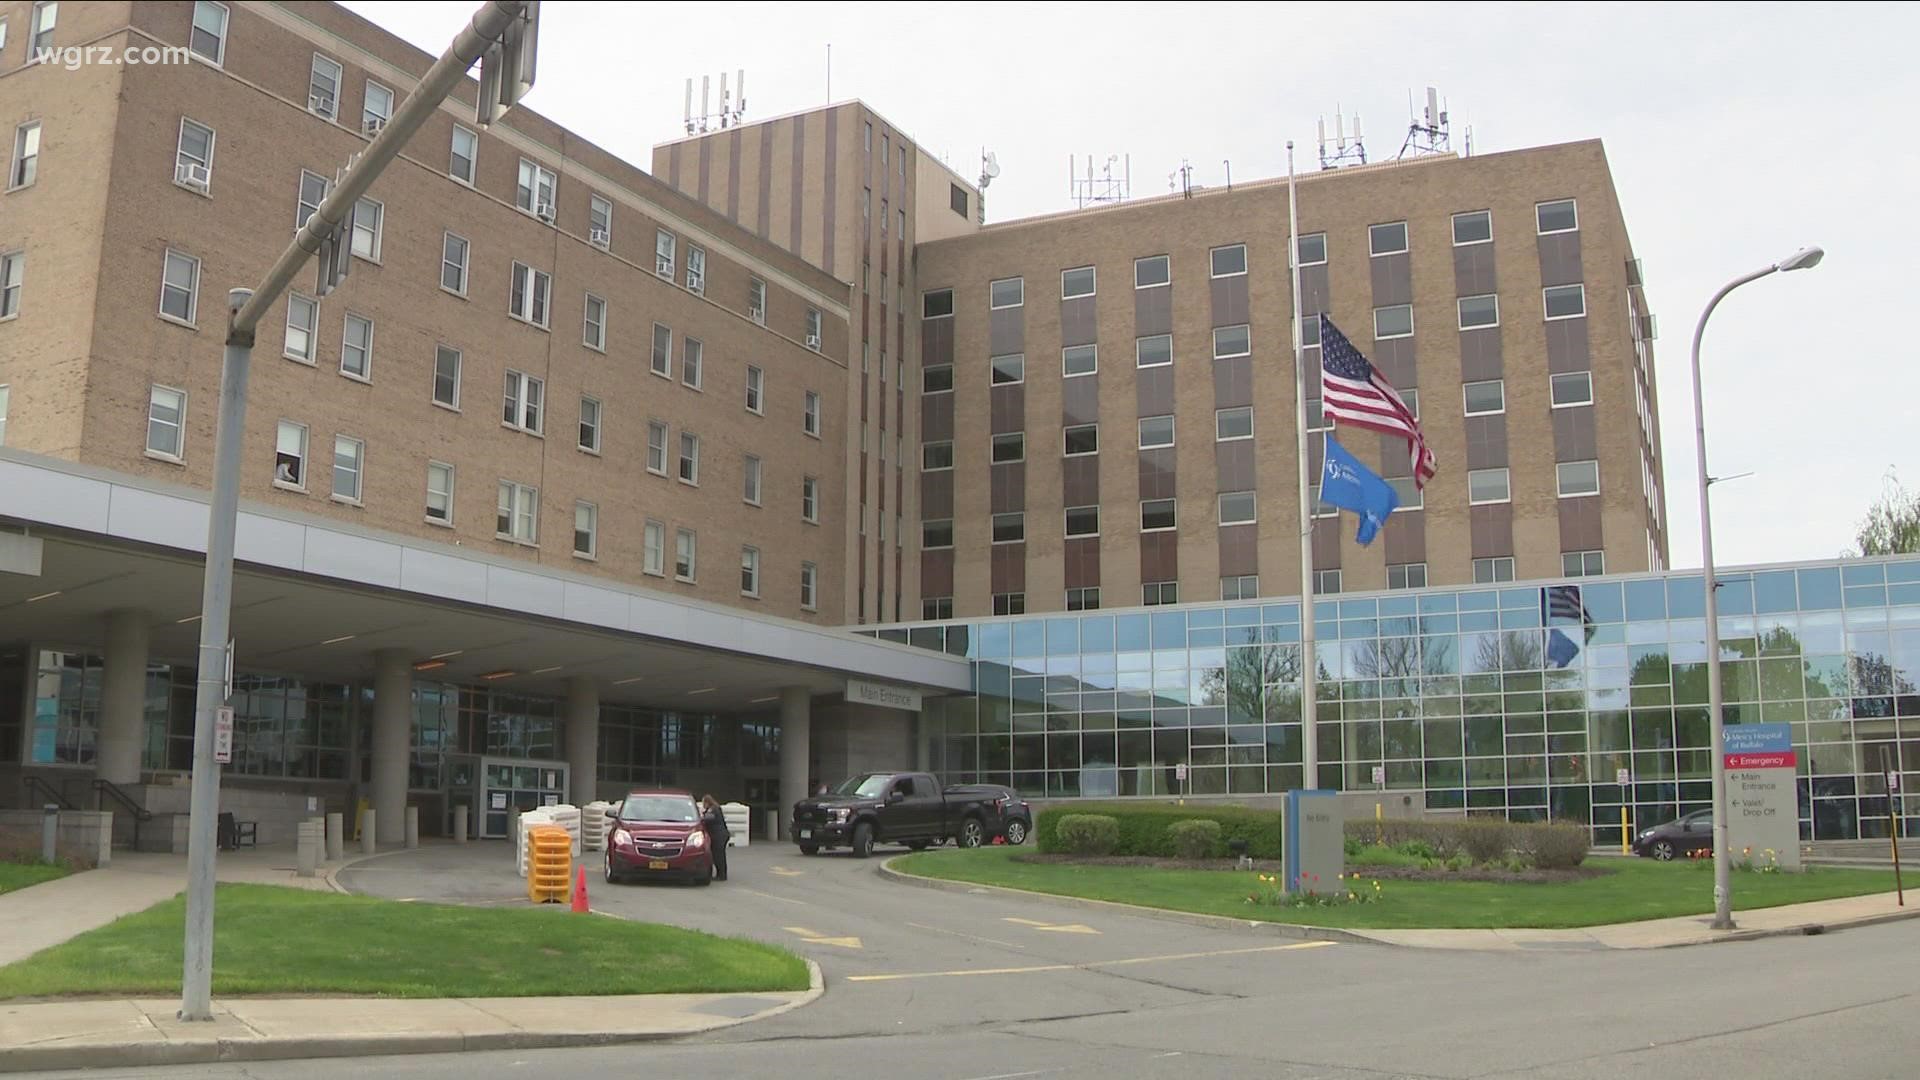 Governor Kathy Hochul said today, many healthcare facilities have already begun bringing in additional help to make up for those who will lose their jobs.